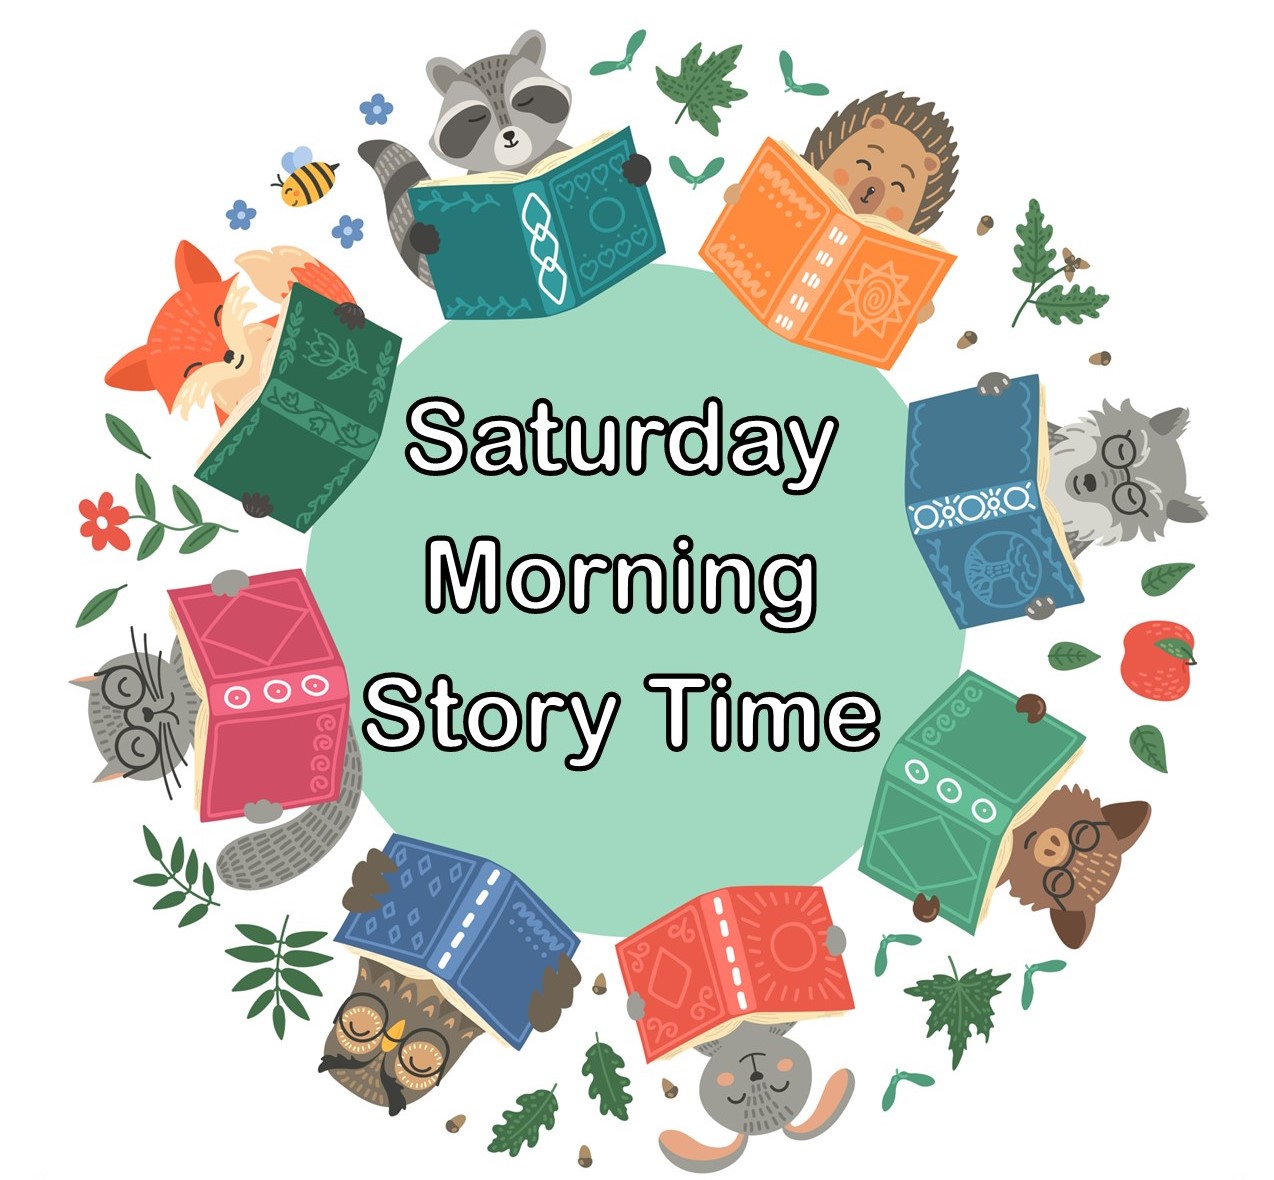 Saturday Morning Story Time